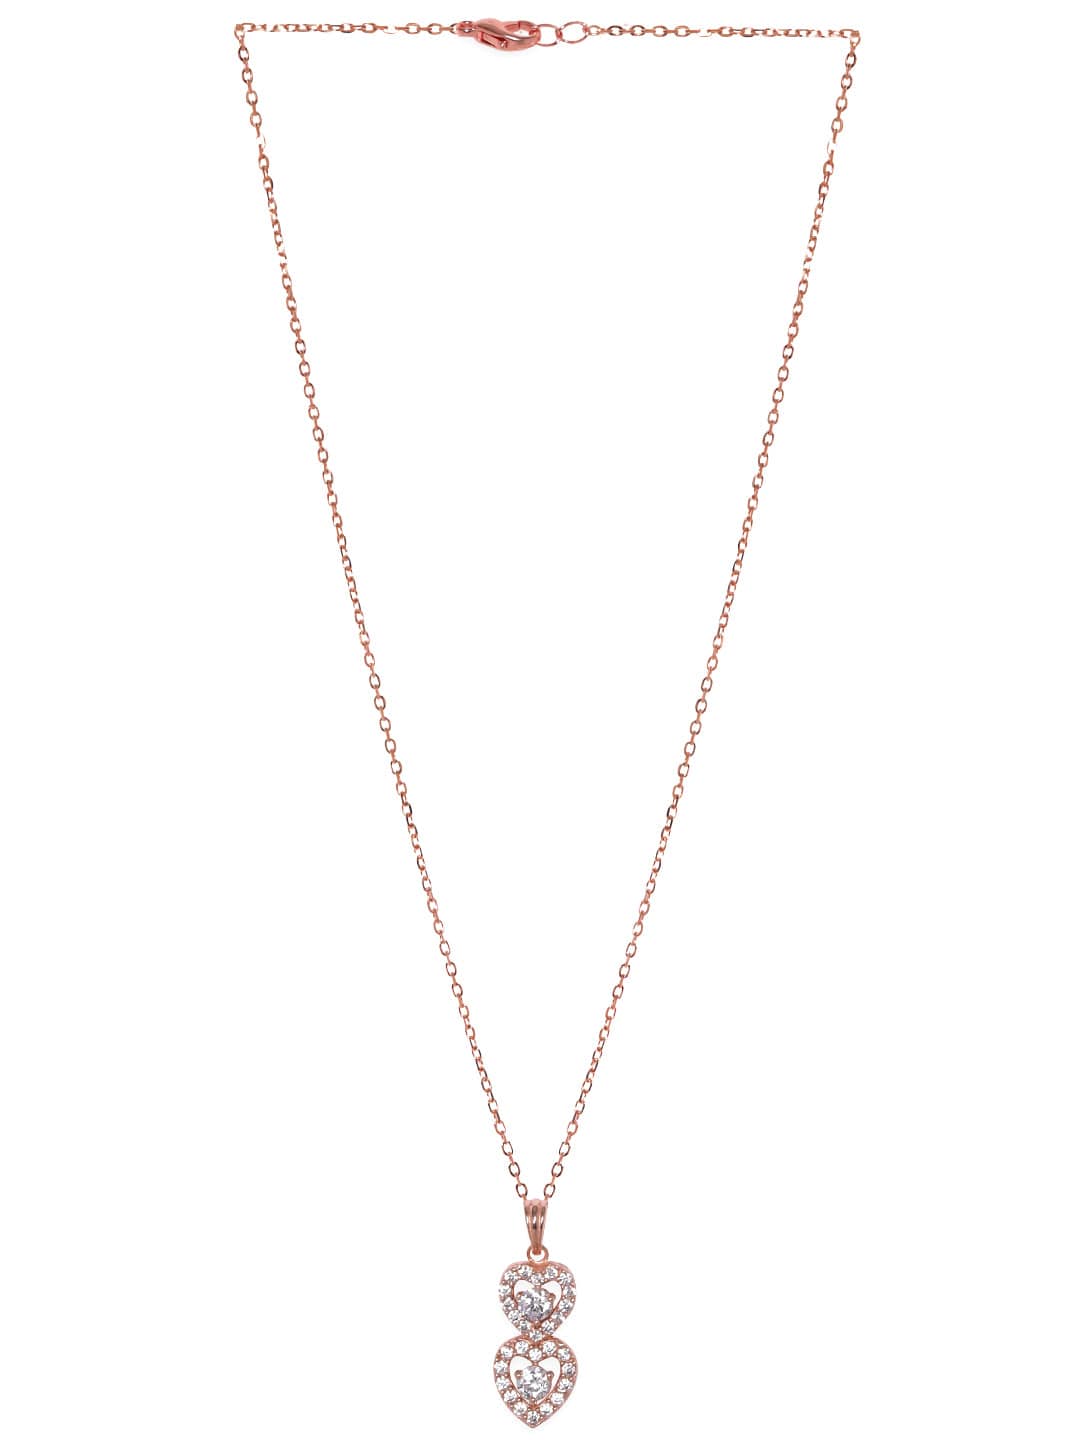 Rubans 25 Silver 18K Rose Gold Plated Double Layer Heart Pendant Necklace Necklaces, Necklace Sets, Chains &amp; Mangalsutra